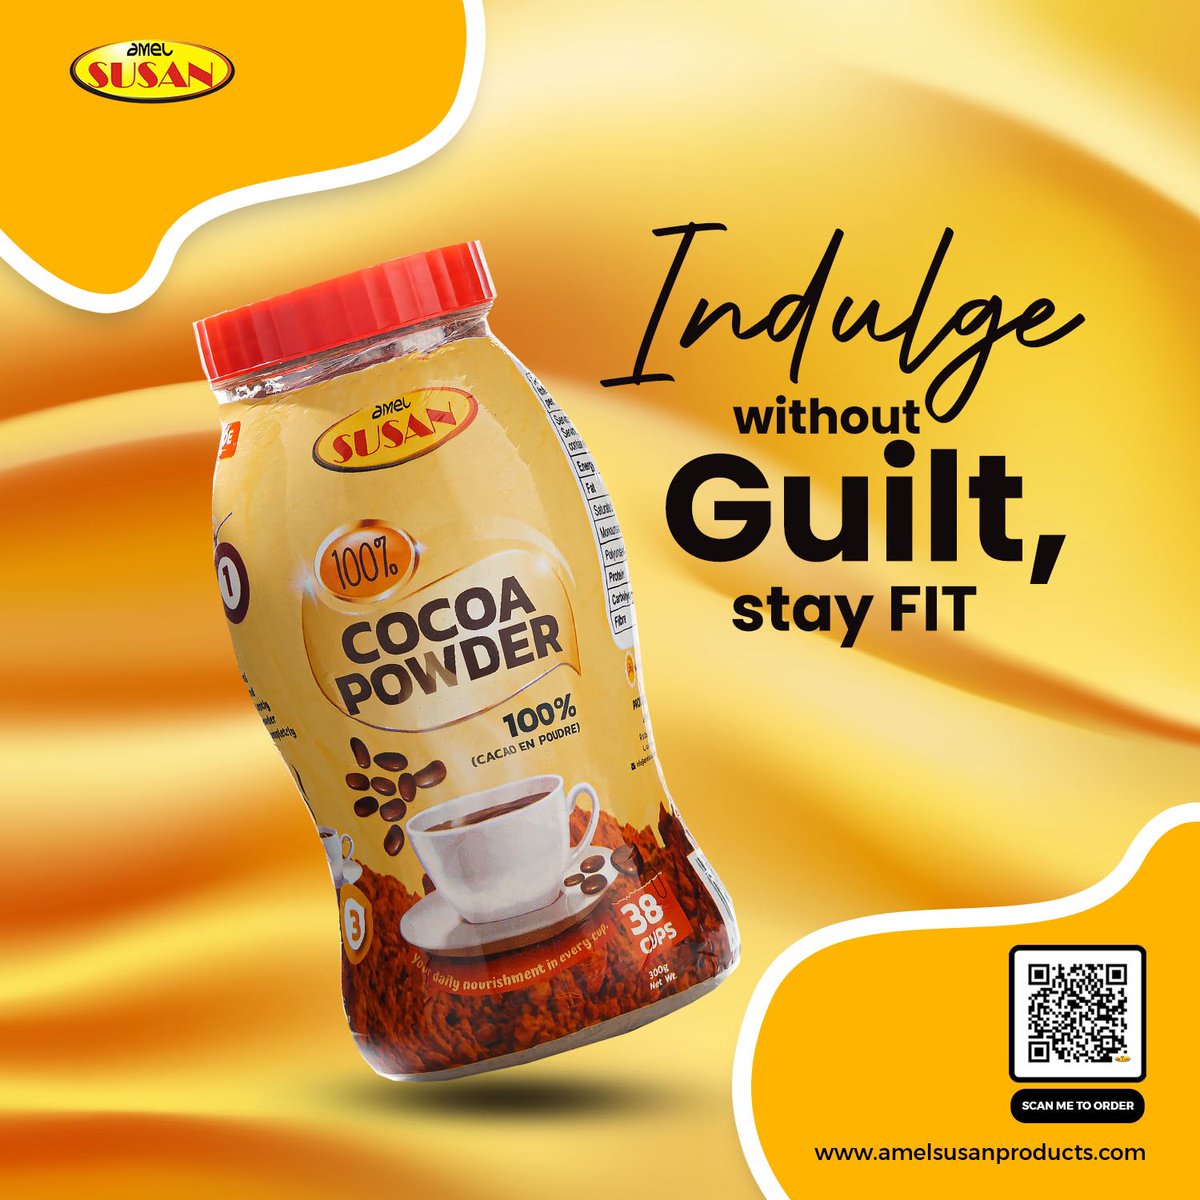 Amel Susan cocoa drink is rich, delicious, and helps manage cravings while supporting your weight loss, and fitness goals. 

Click the link in the bio to shop your favourite Cocoa drink

#TreatYourselfRight #AmelzingHealth#BreakfastGoals #FuelYourDay #amelambassadors #companion